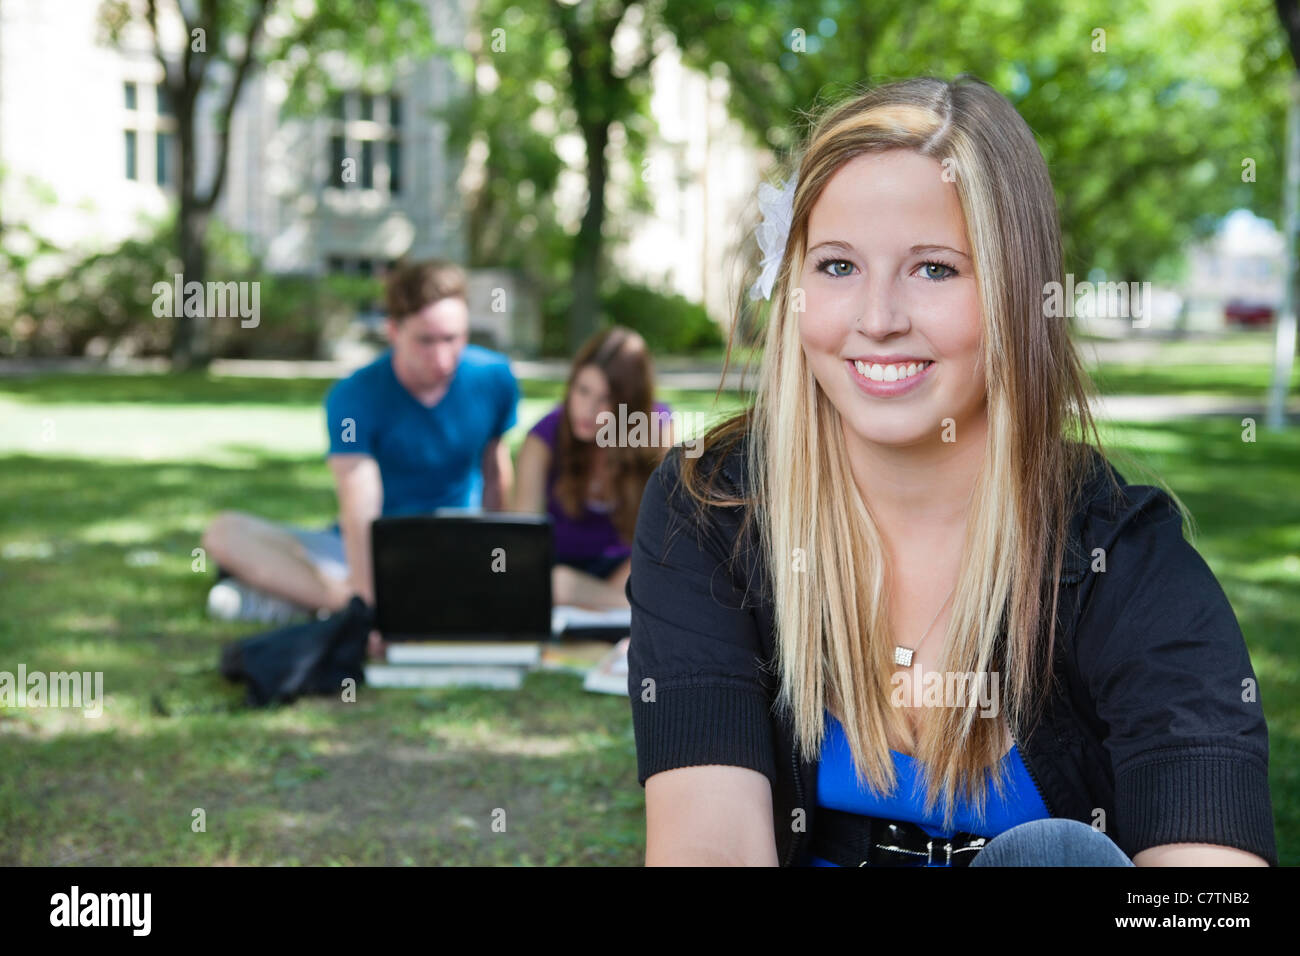 Portrait of happy teenage girl with classmates in background Stock Photo